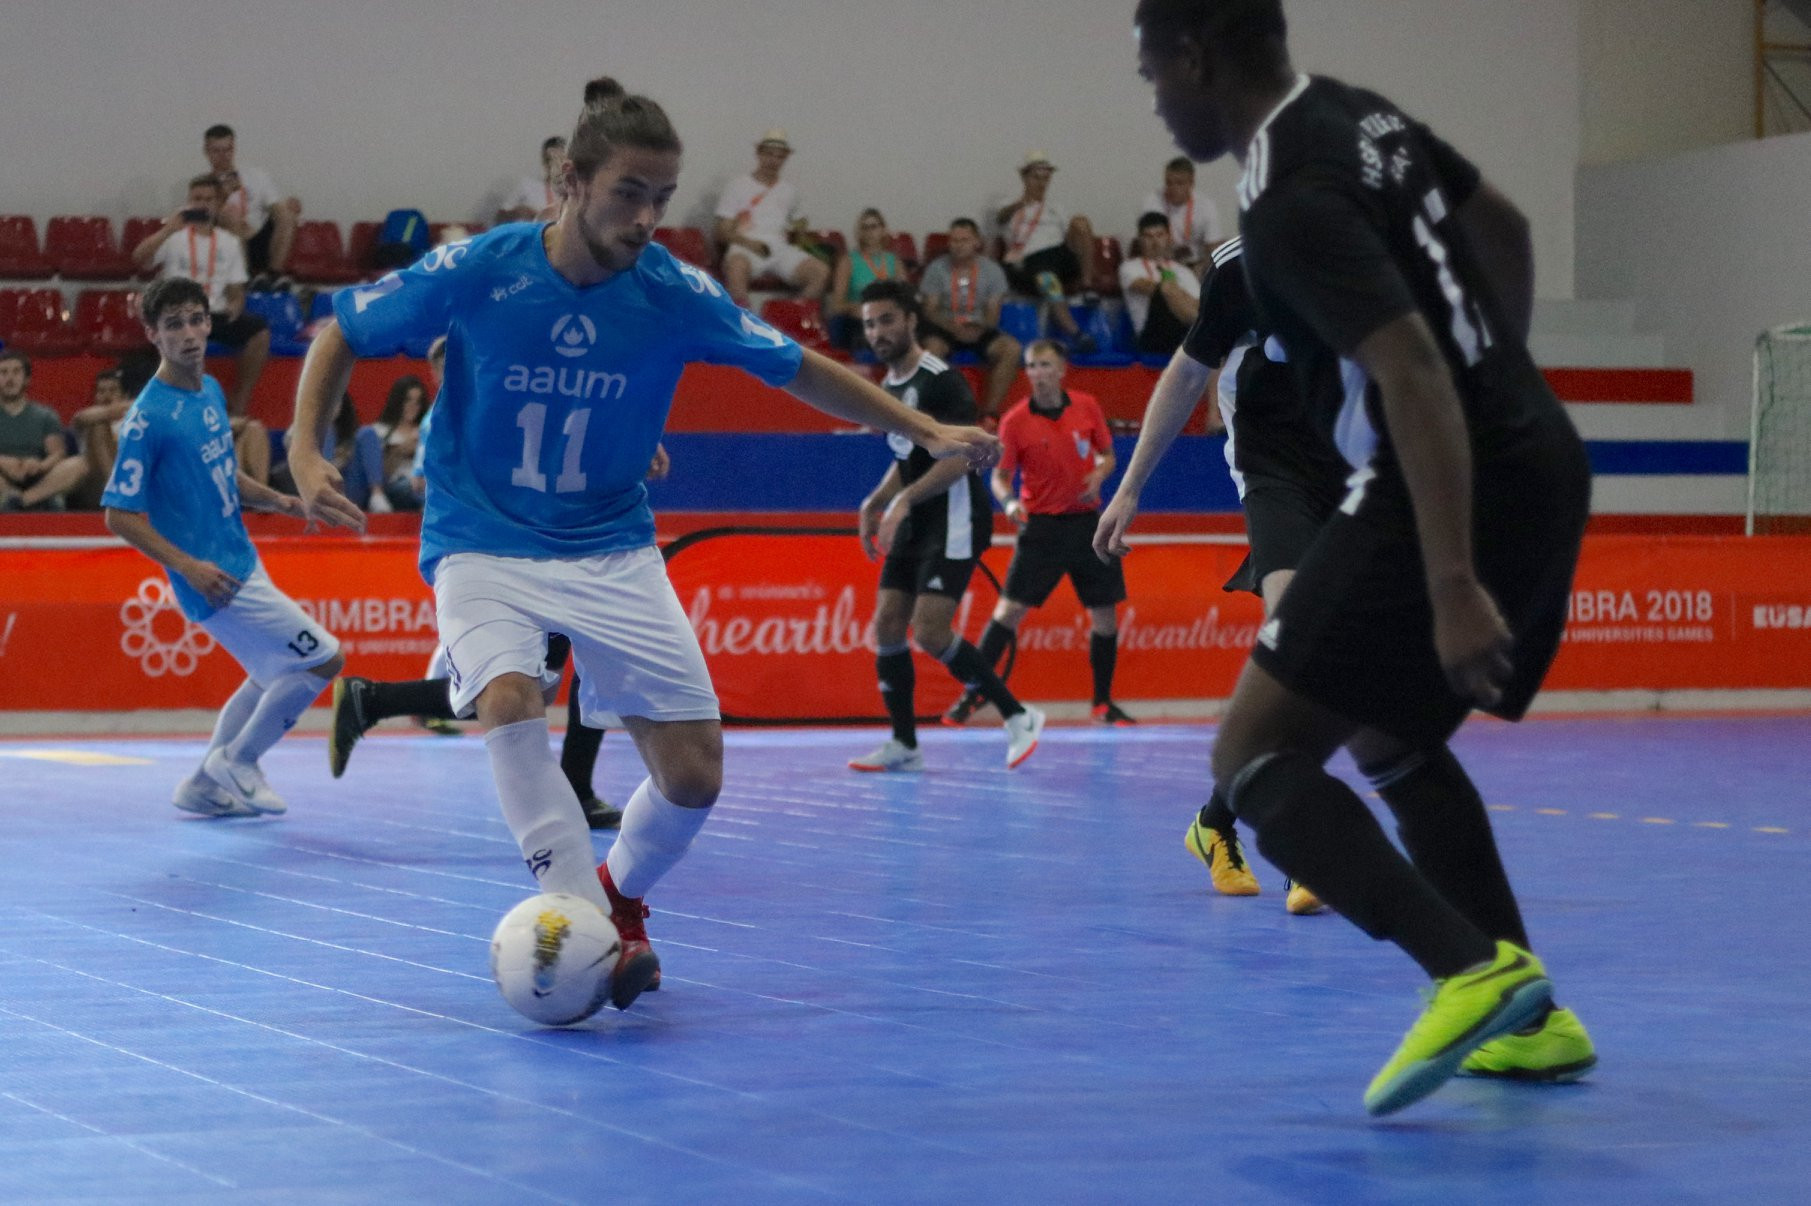 The group stage of futsal competition also continued in Coimbra ©Facebook/EUG Coimbra 2018